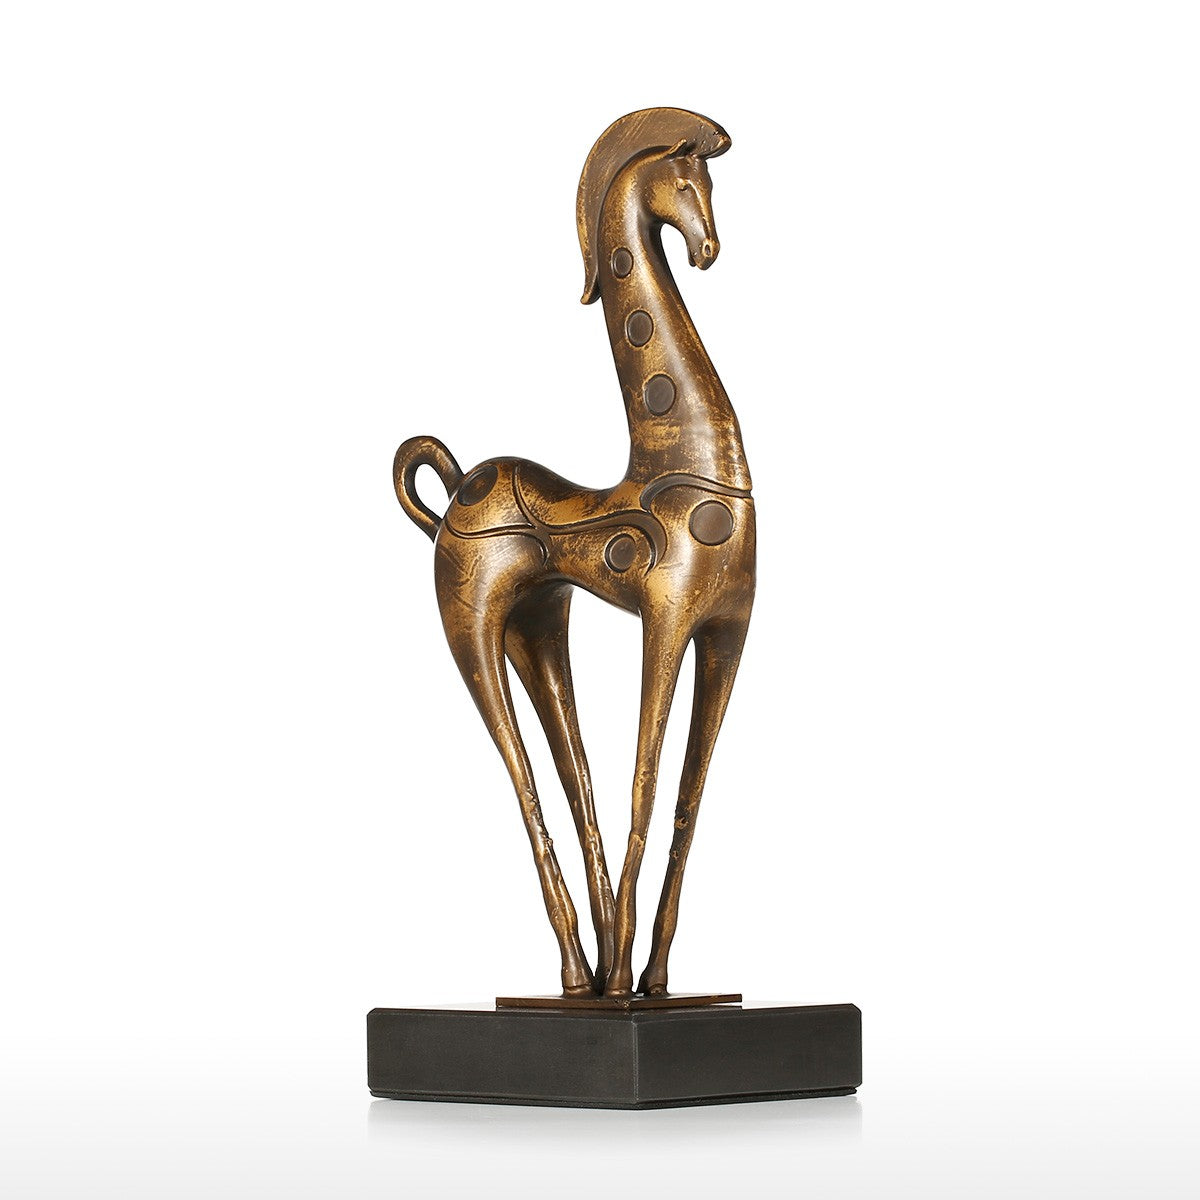 Horse Racing Art and Horse Metal Art with Horse Art and Horse Sculpture